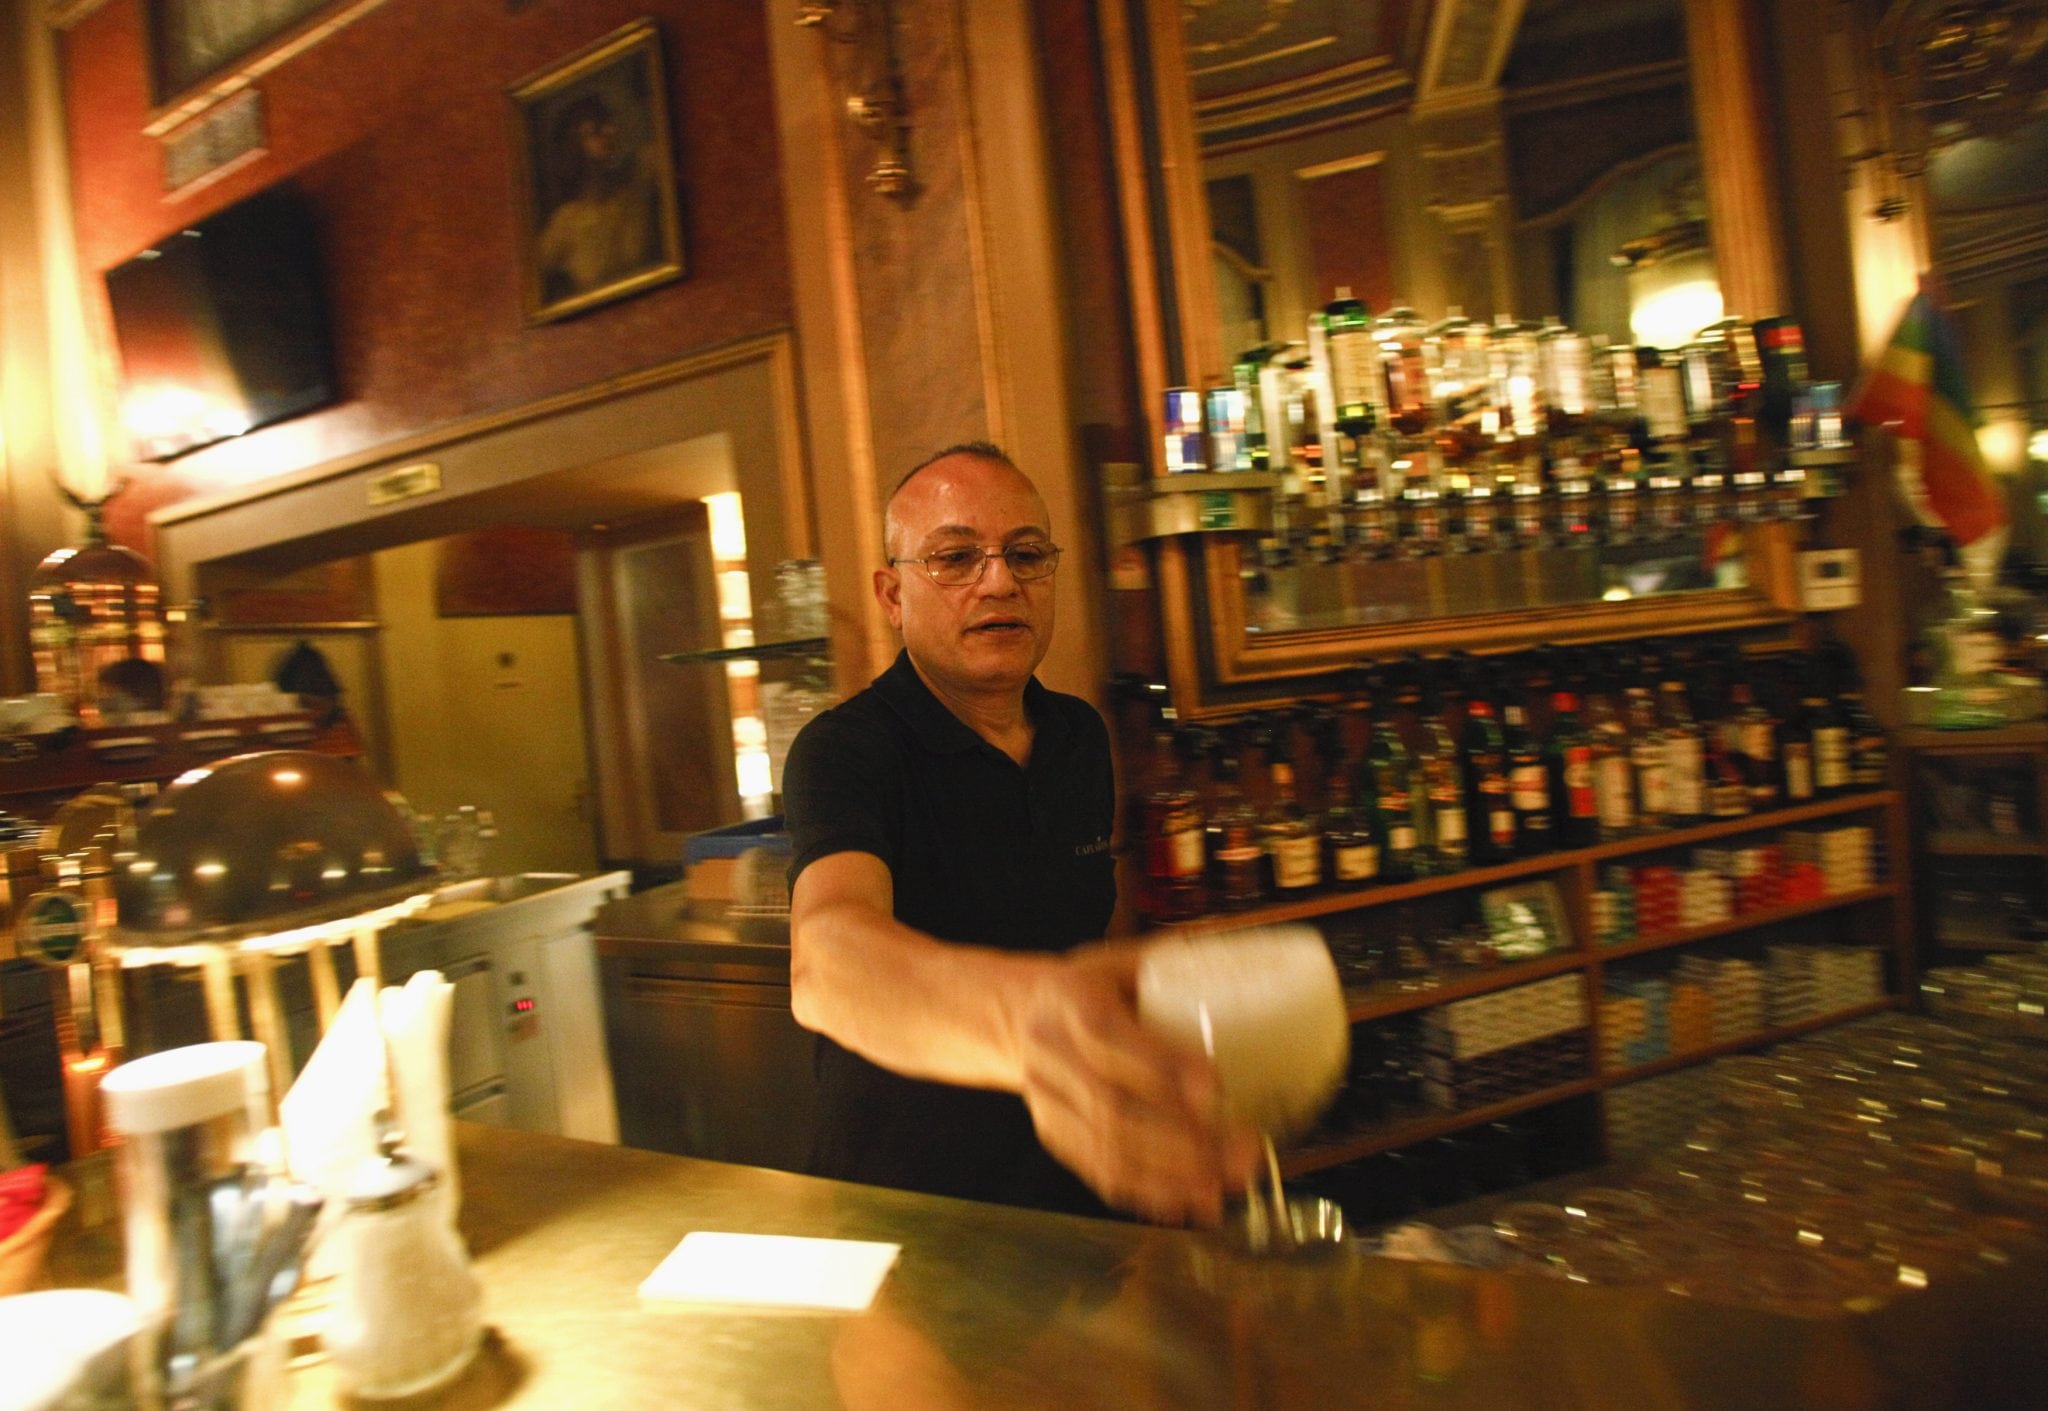 A waiter serves a drink at Cafe Savoy, which caters to lesbian, gay, bisexual and transgender customers in Vienna.  